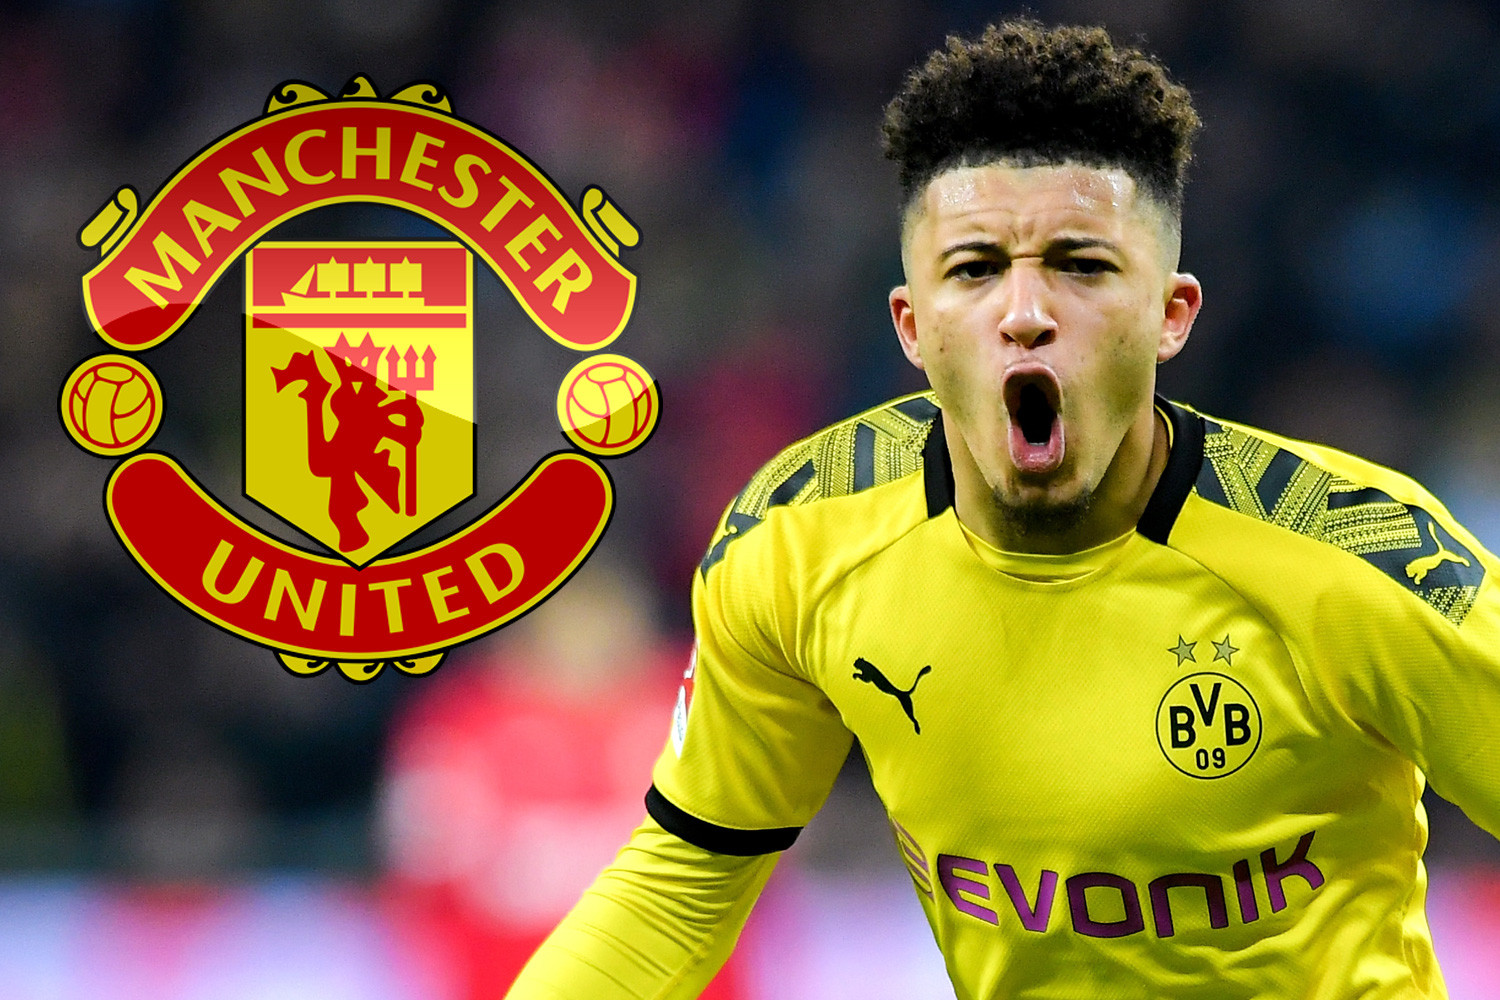 Manchester United 'in love' with Jadon Sancho, claims reliable journalist